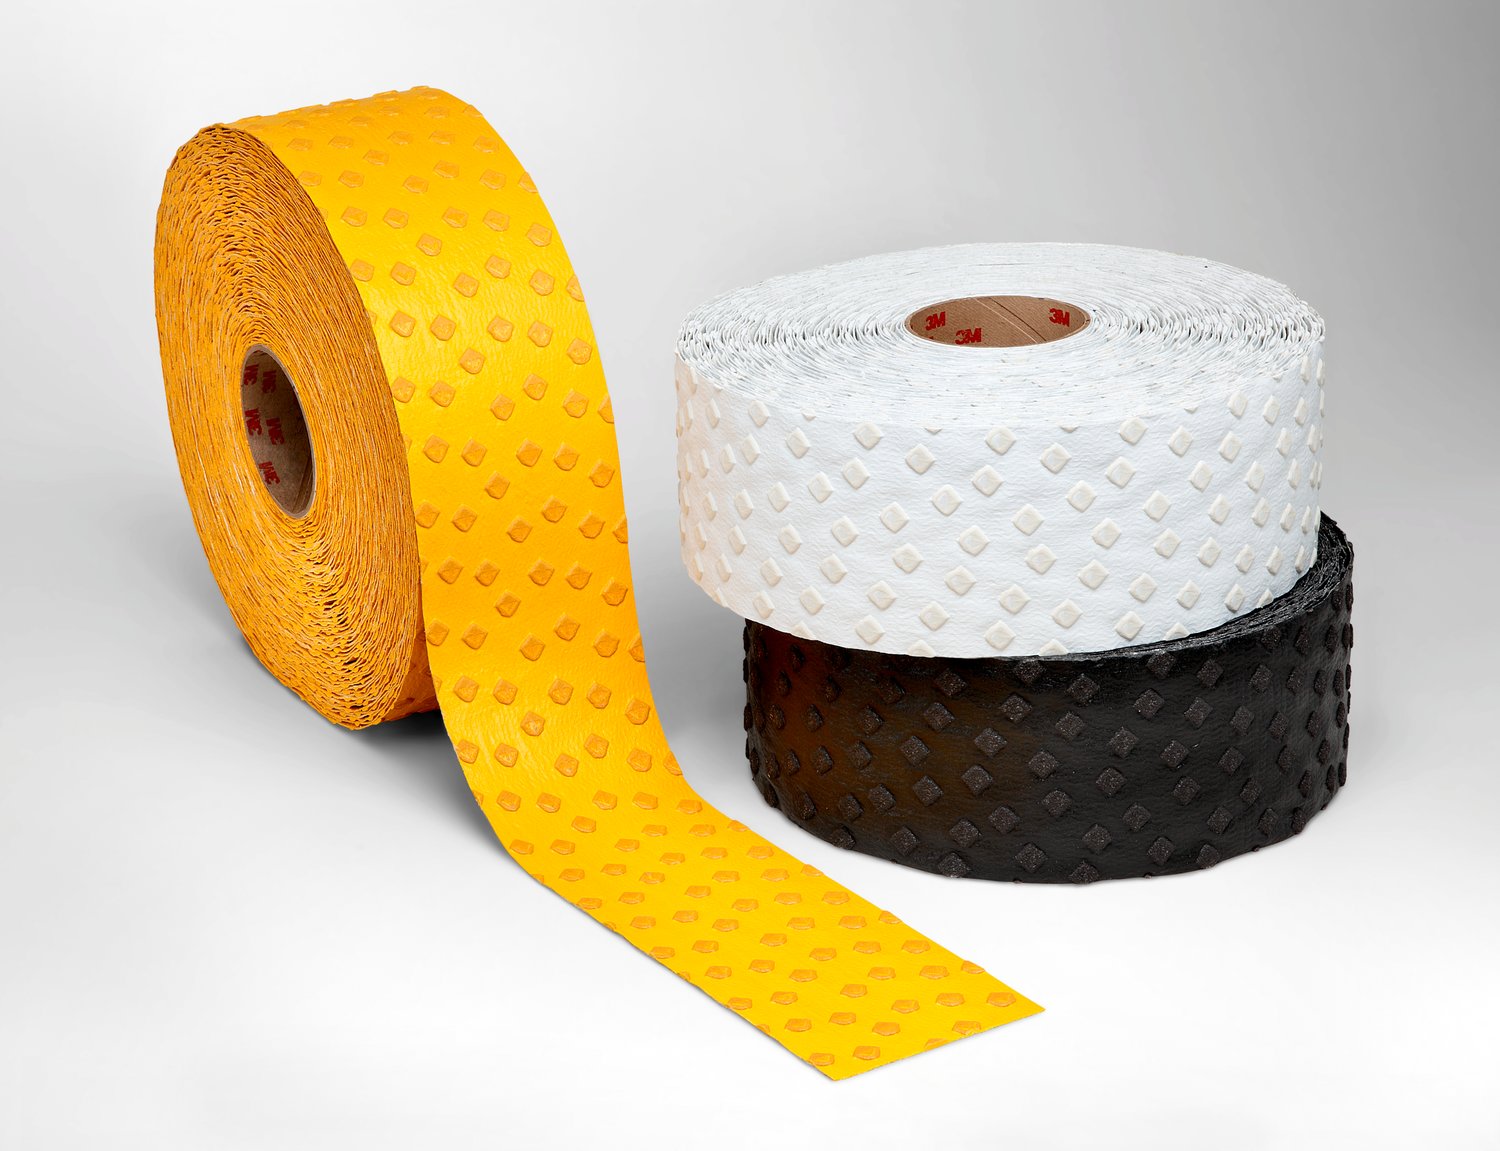 7100113214 - 3M Stamark Wet Reflective Removable Contrast Tape A711-5 Yellow/Black
with 1.5 in border, Configurable roll